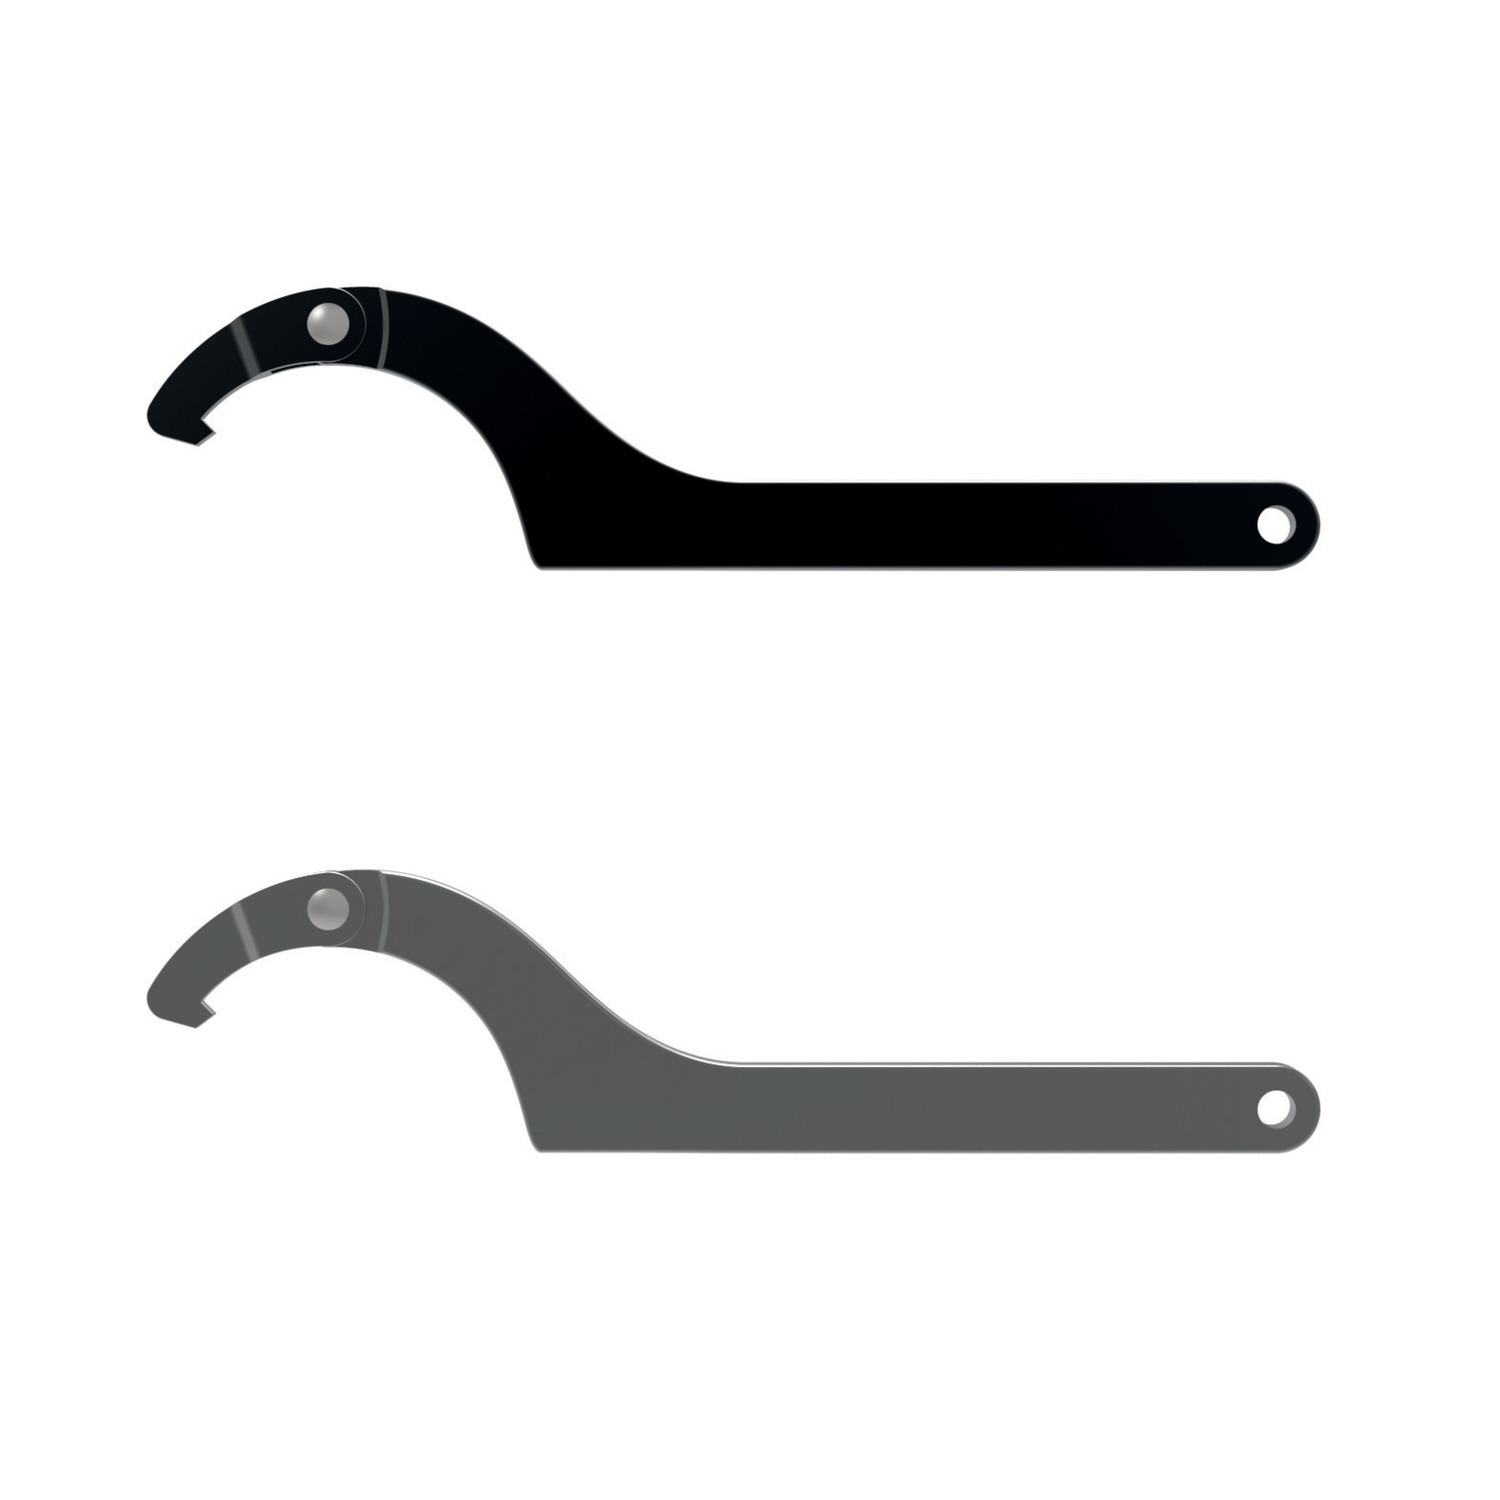 95100 - Hook Spanners - with Hook Nose